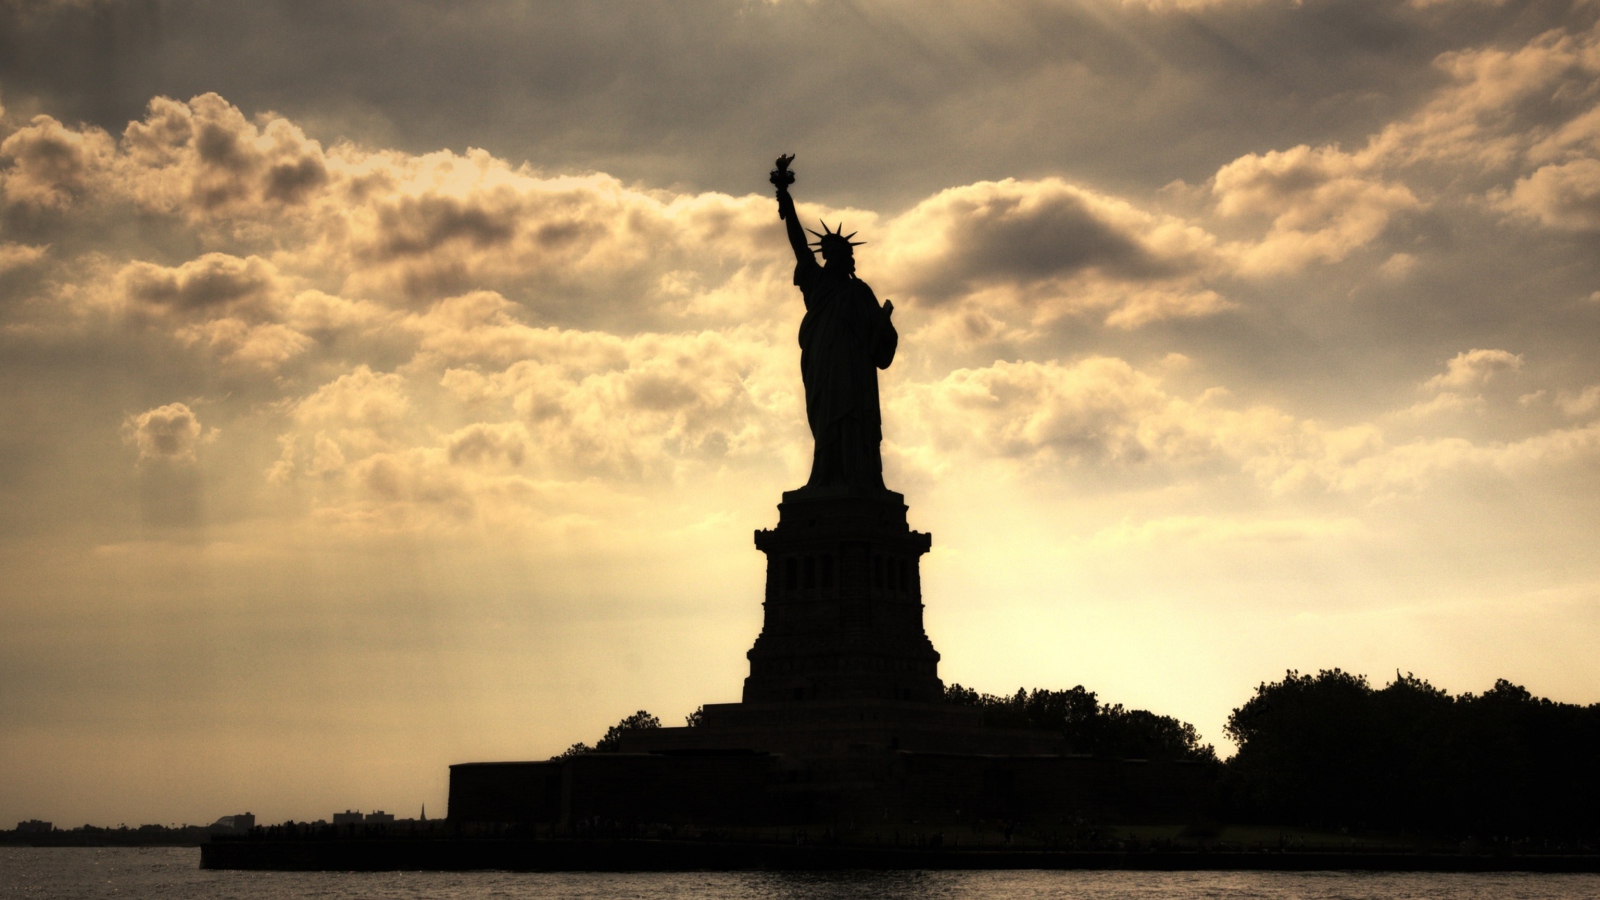 Statue Of Liberty In United States Of America wallpaper 1600x900